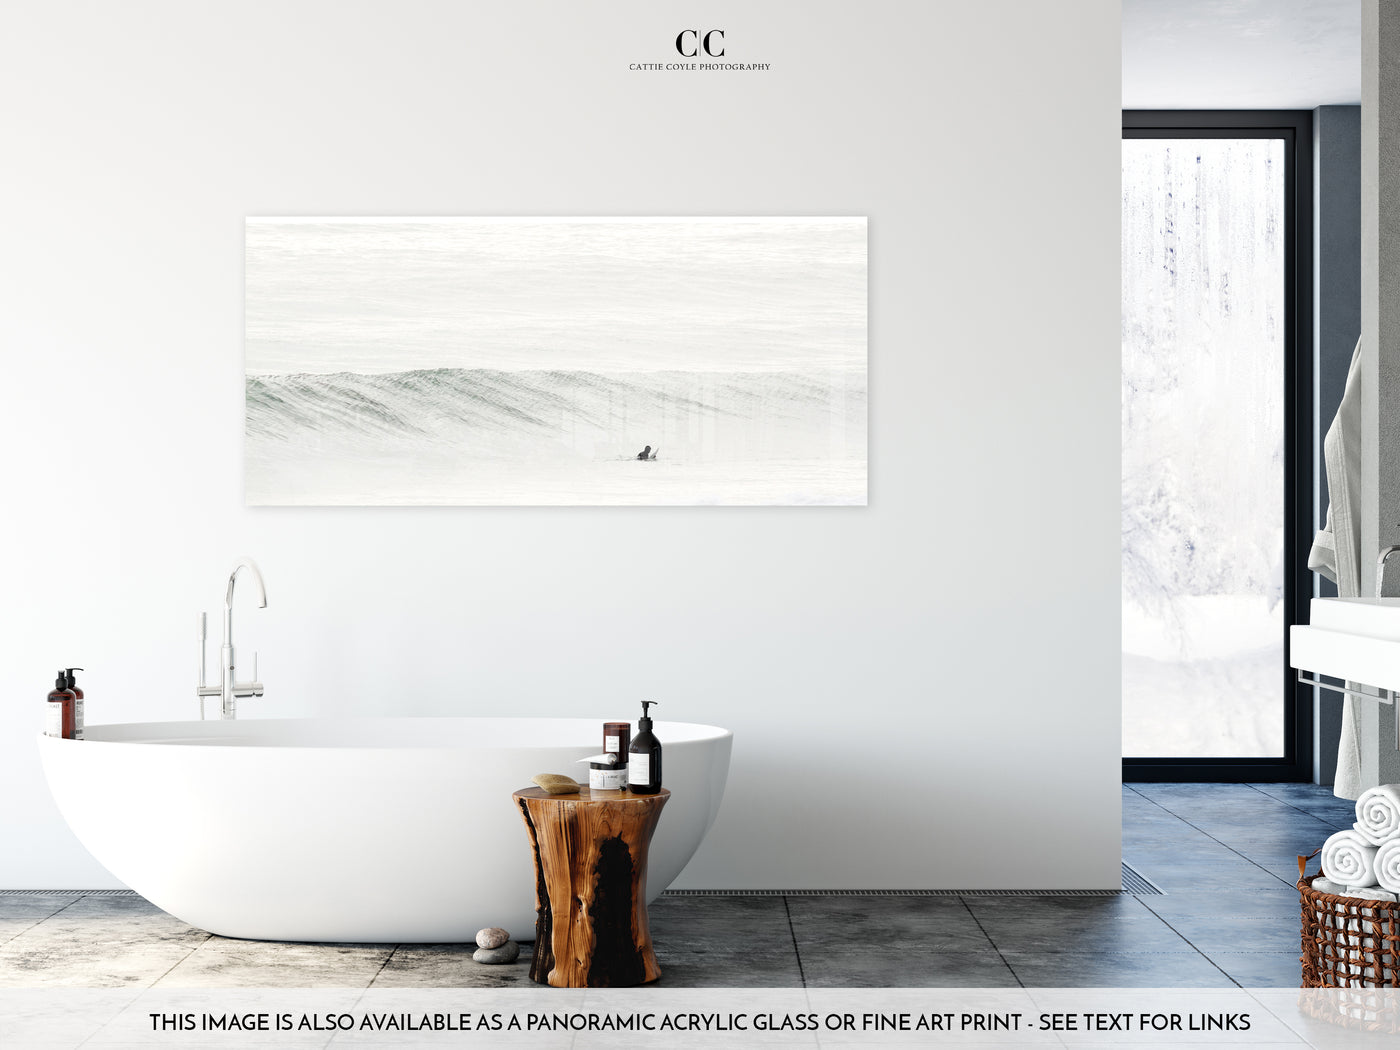 Large panoramic surfing art print by Cattie Coyle Photography